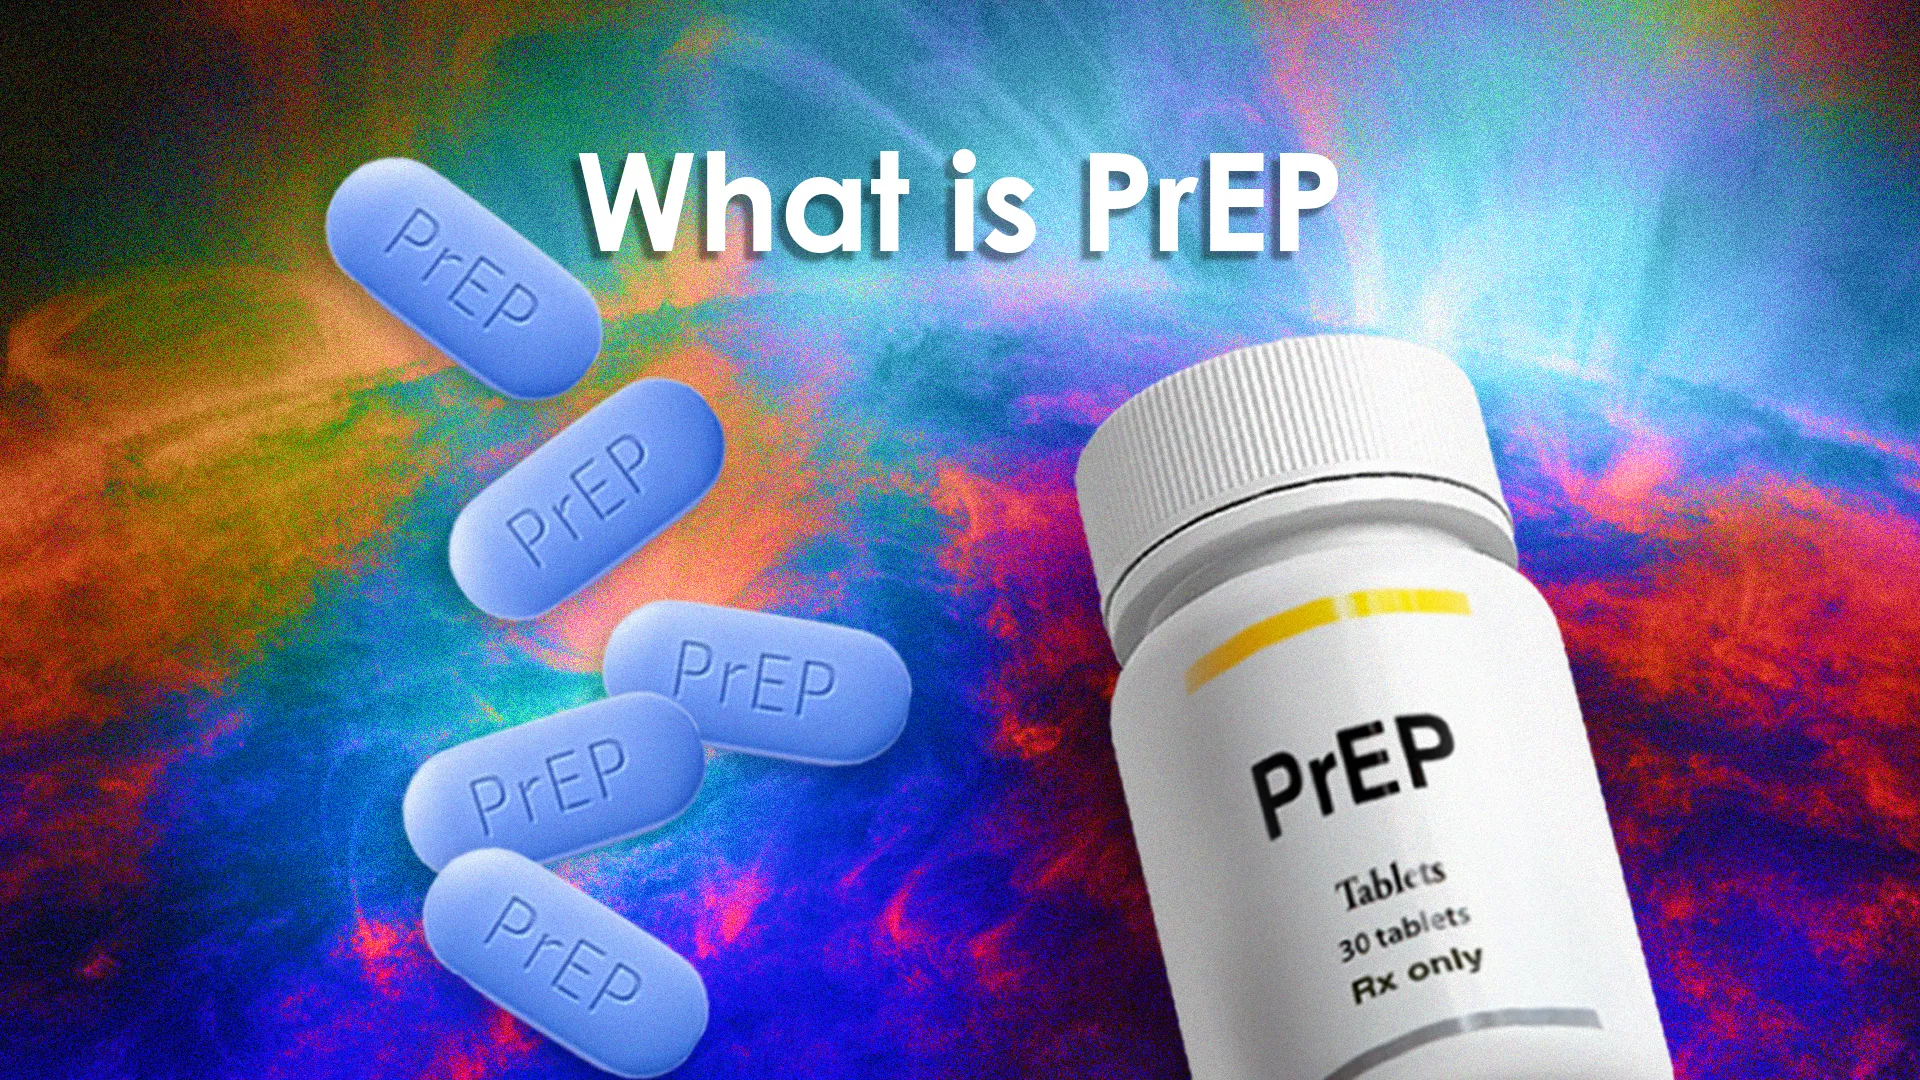 What is PrEP